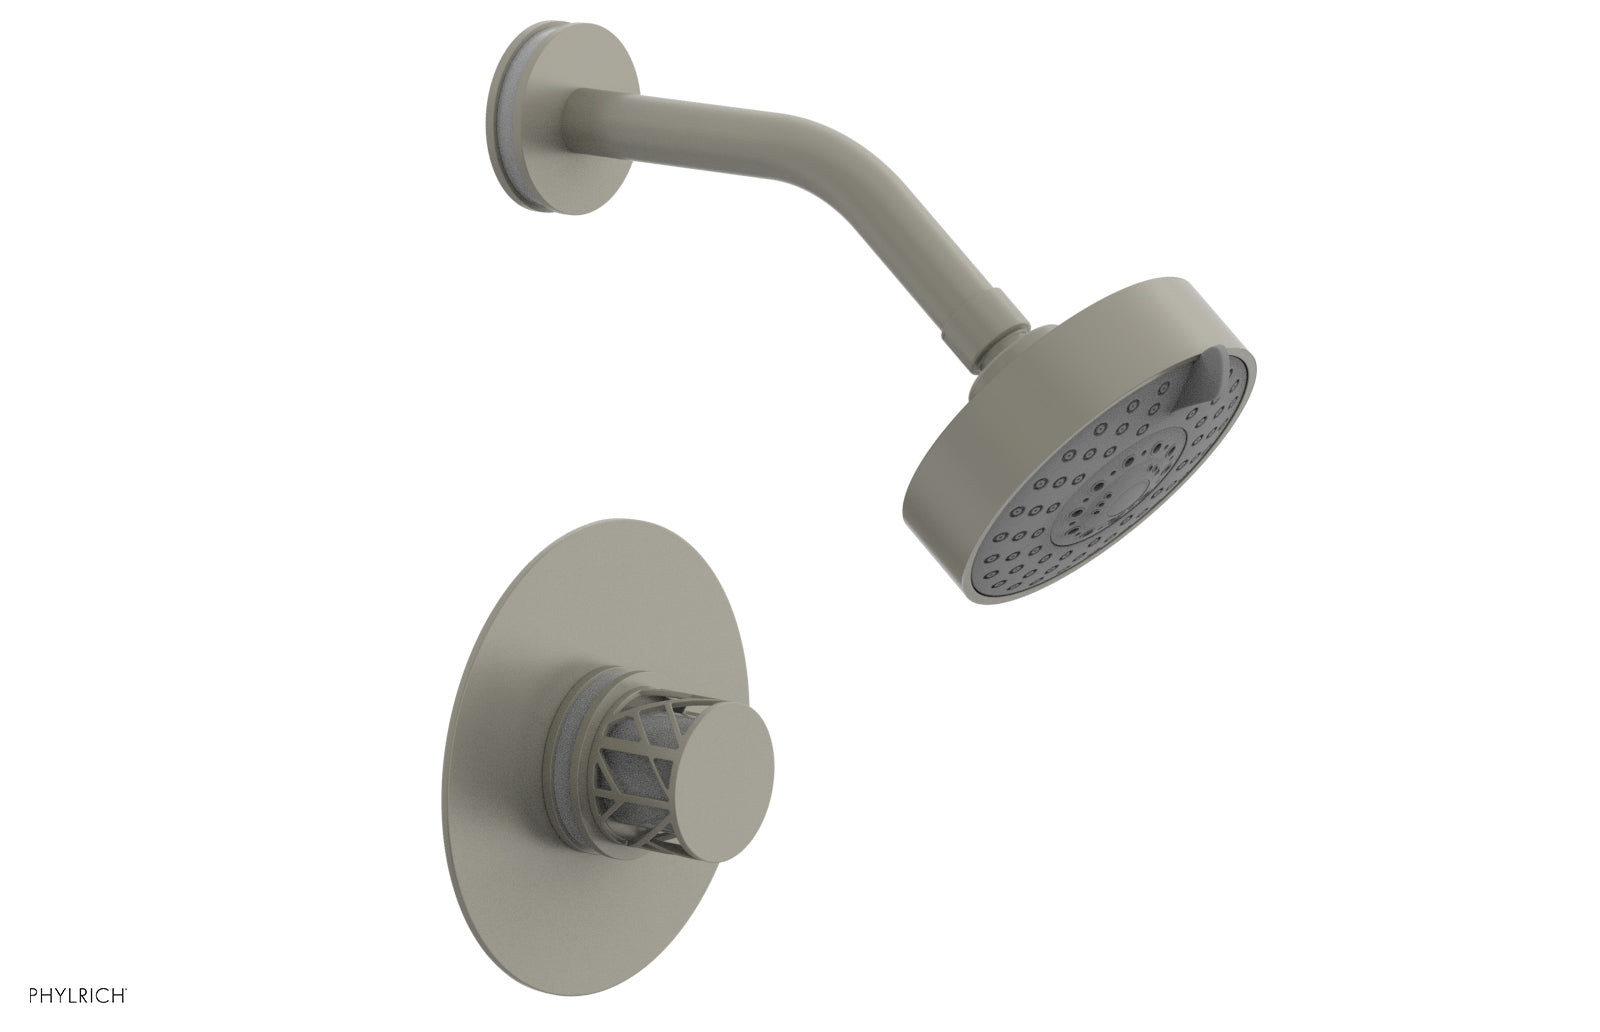 Phylrich JOLIE Pressure Balance Shower Set - Round Handle with "White" Accents